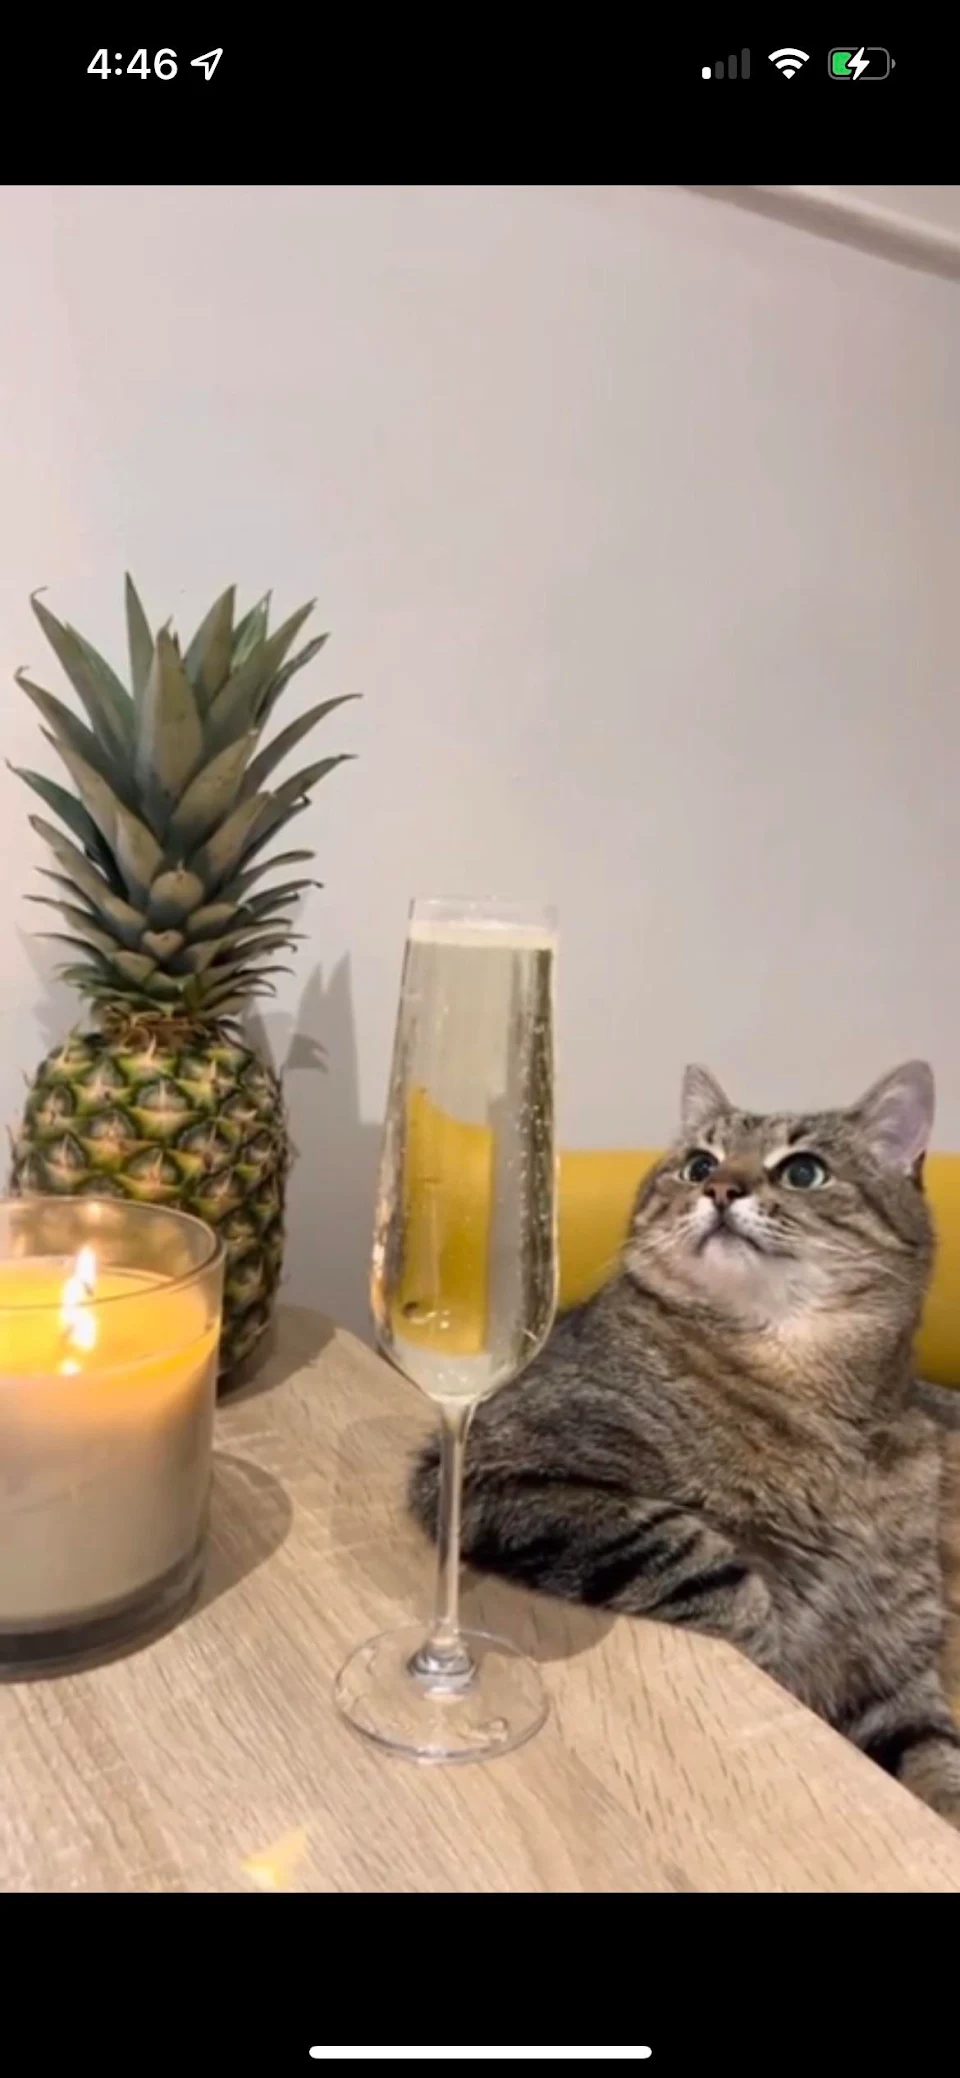 cat staring at champagne bubbles